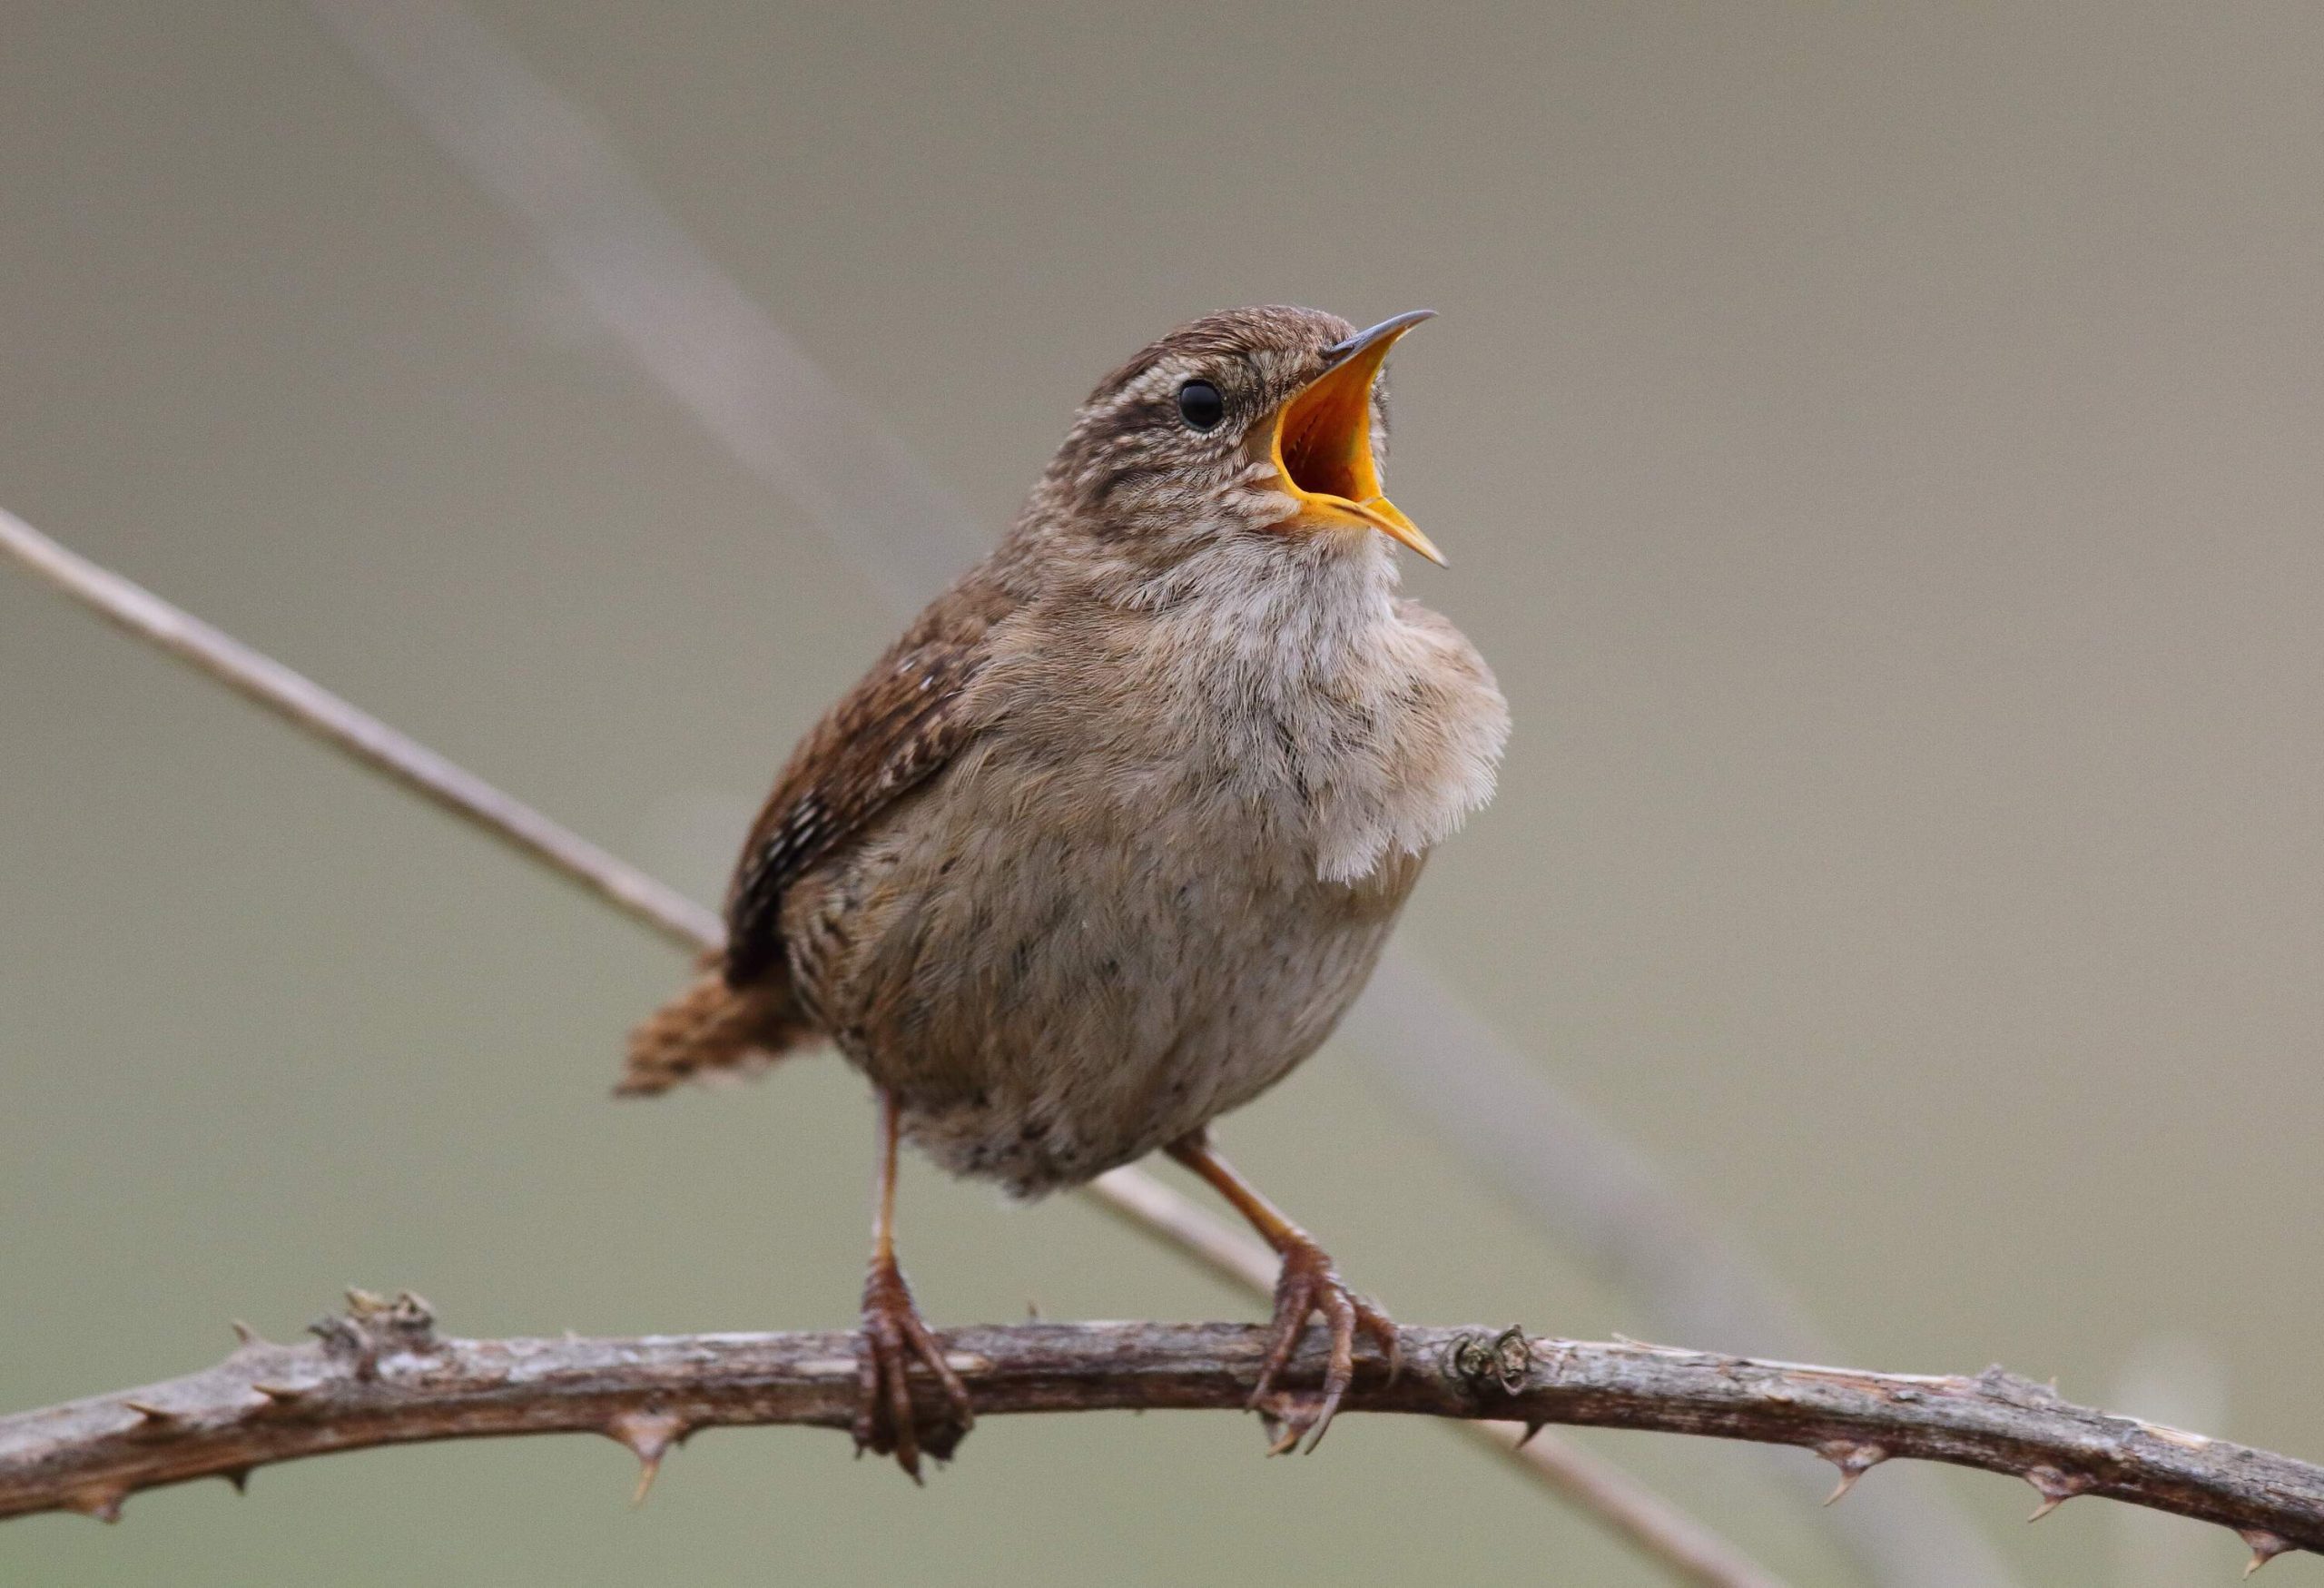 A Wren perched on a bramble in full song